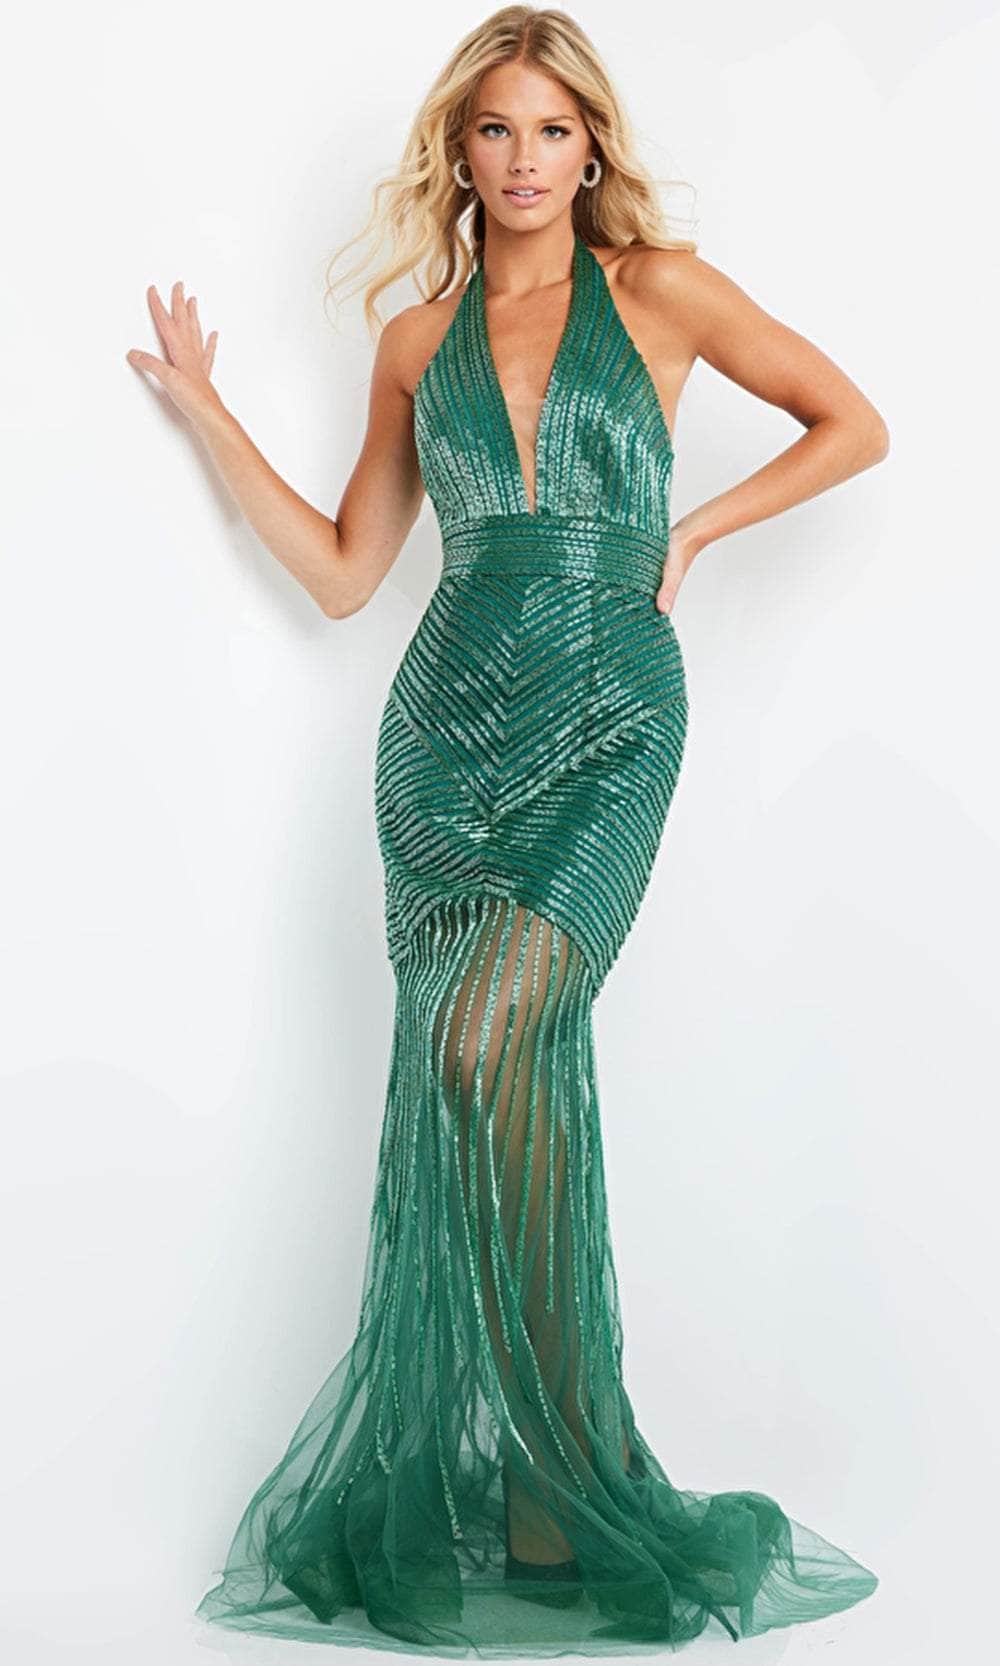 Image of Jovani 2465 - Halter Plunging Beaded Gown